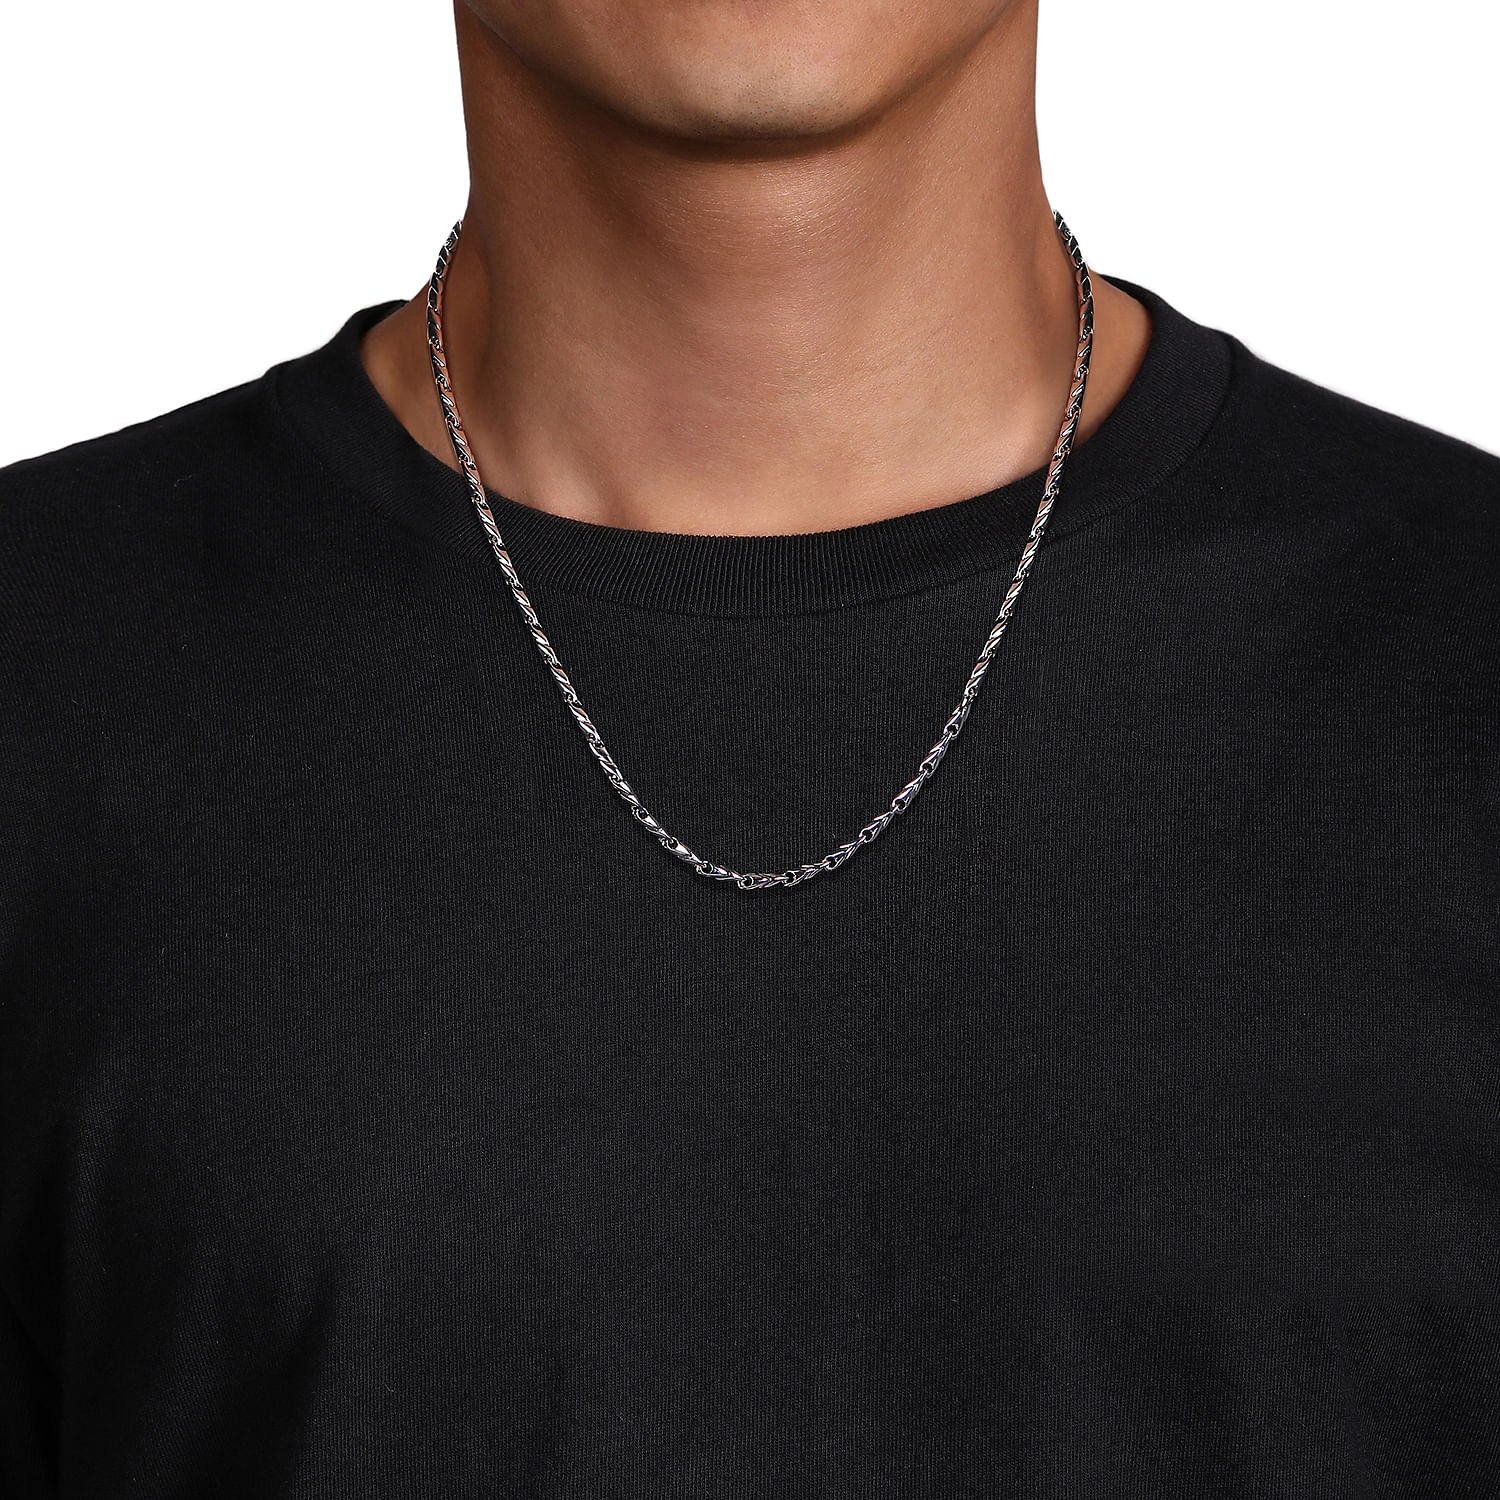 22 Inch 925 Sterling Silver Men's Chain Necklace - Shot 4